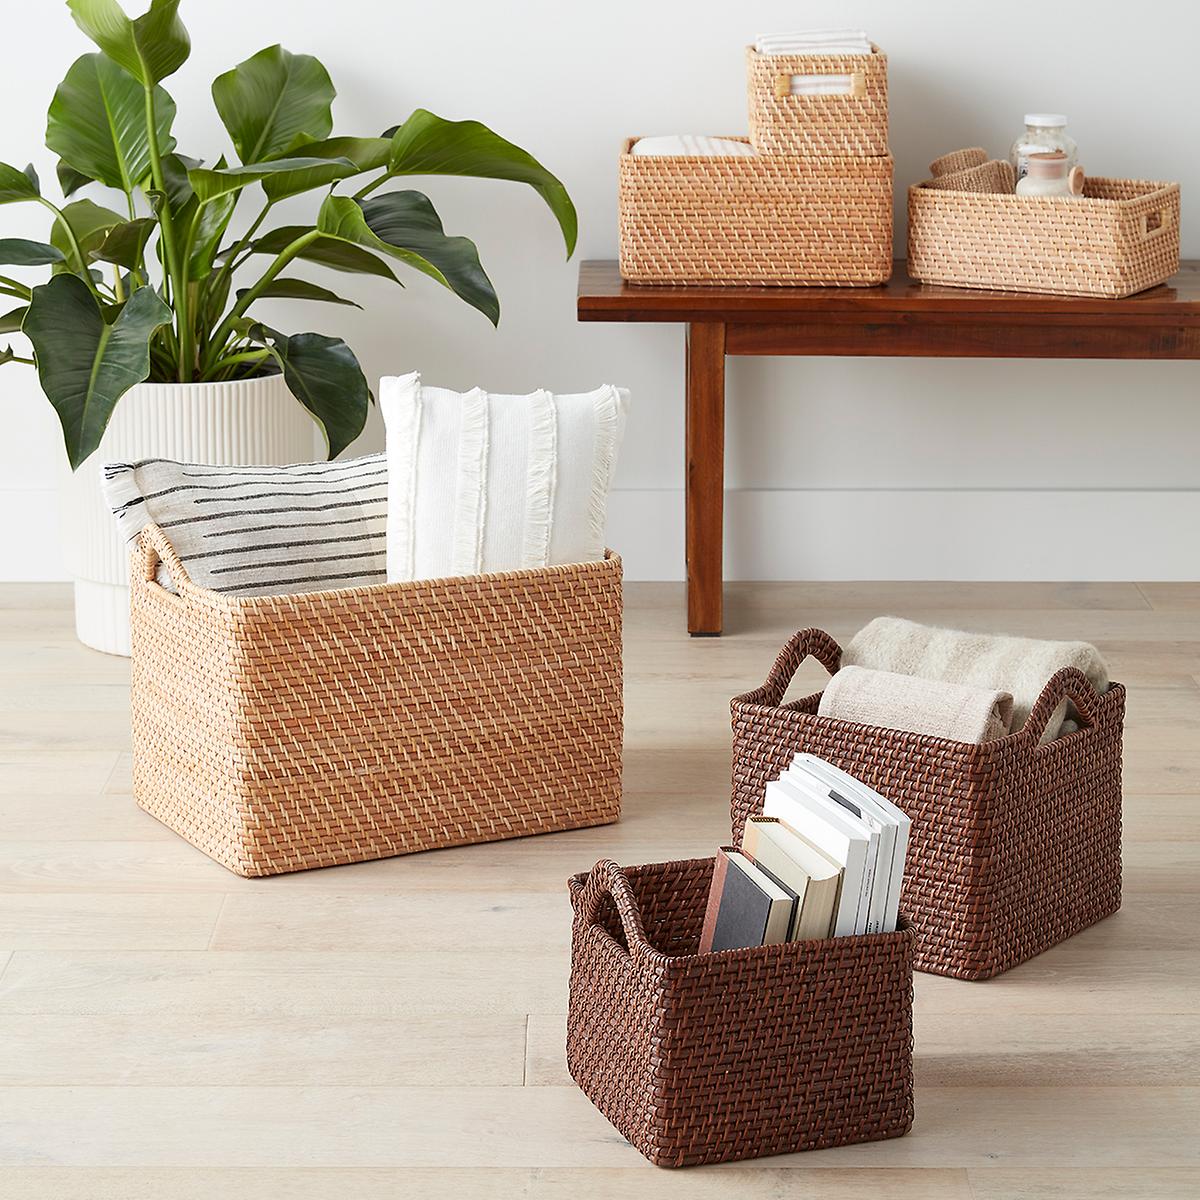 The Container Store - organization - baskets - get organized -